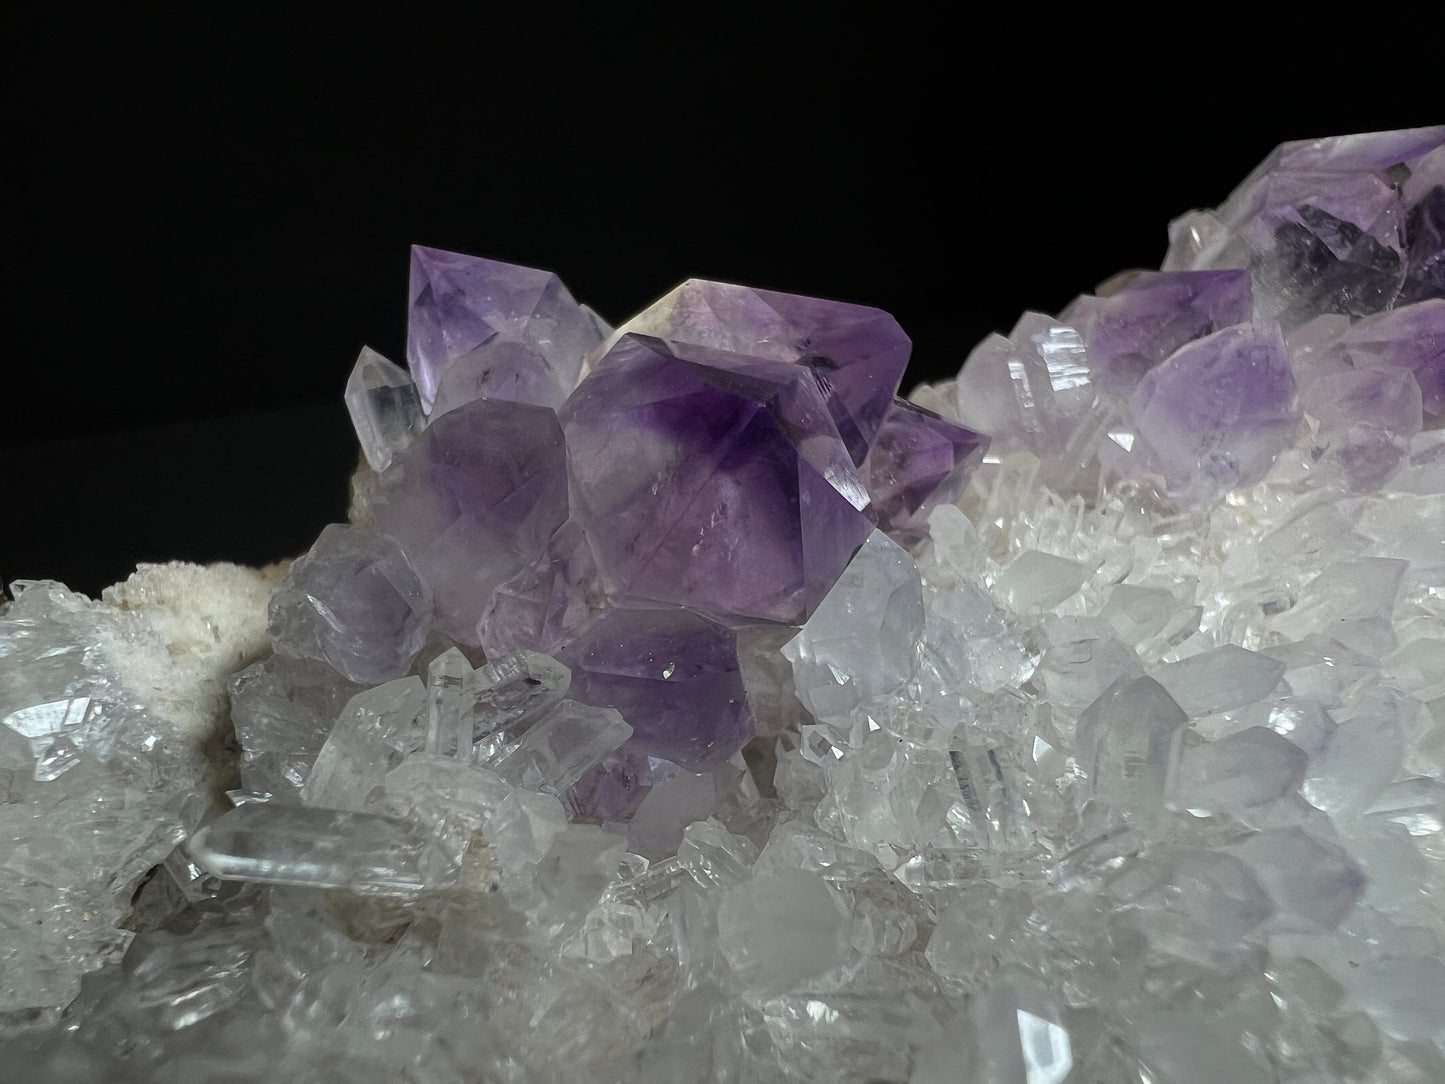 Amethyst From Jackson's Crossroads, Wilkes County, Georgia- Collectors Piece, Statement Piece